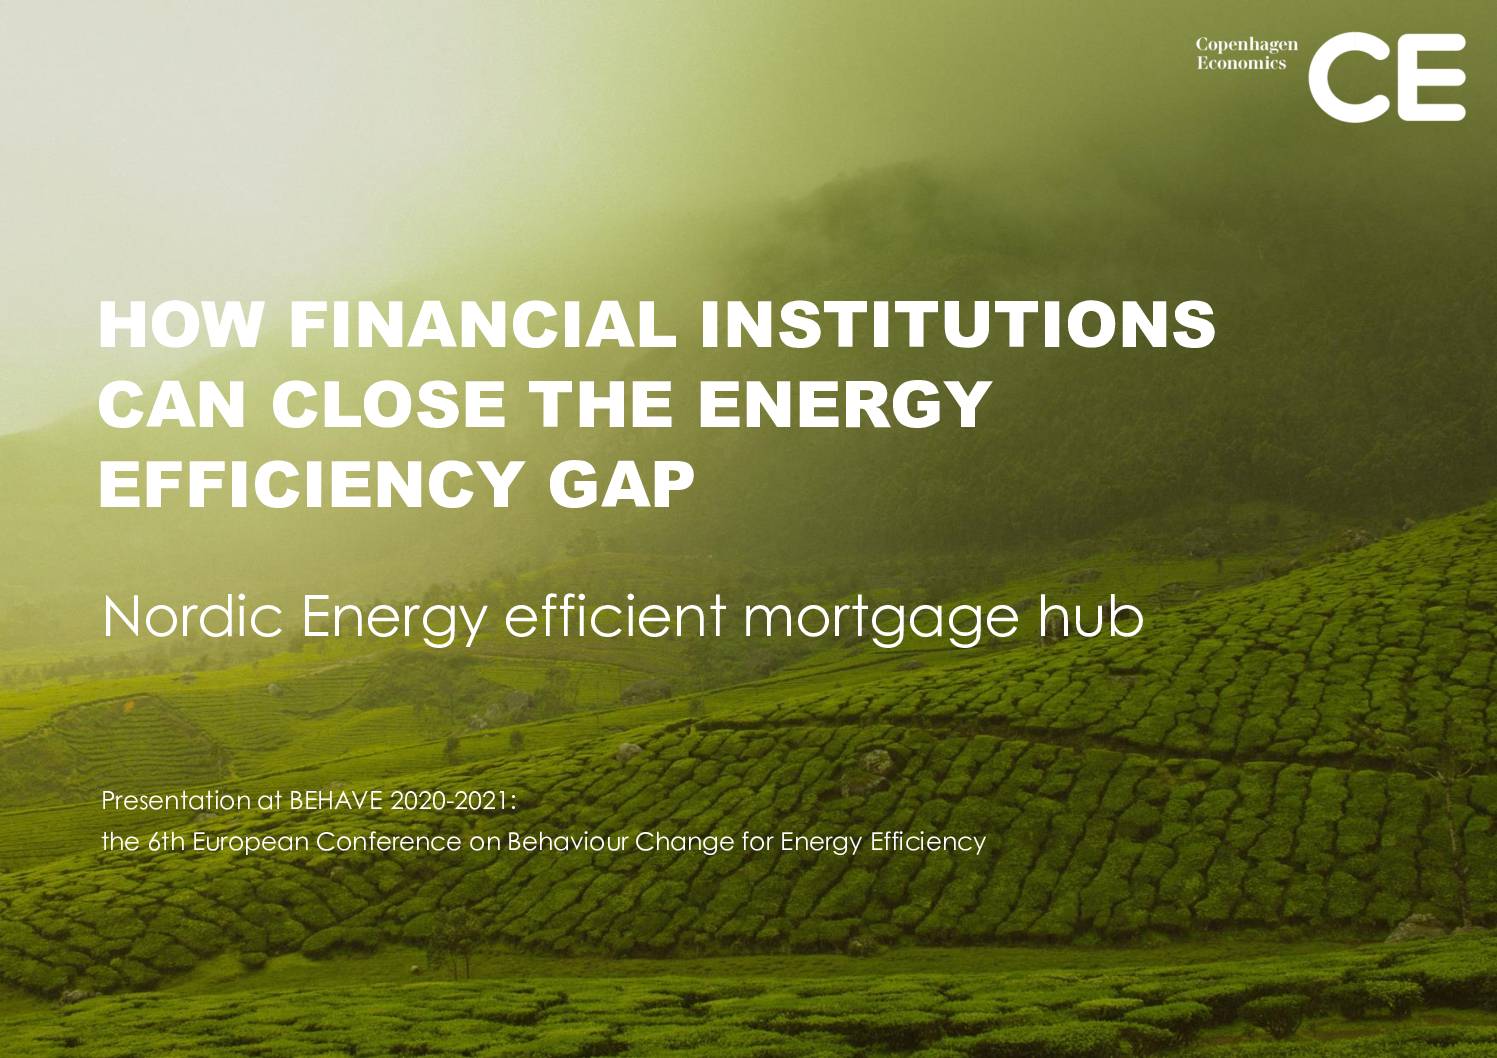 How financial institutions can close the energy efficiency gap